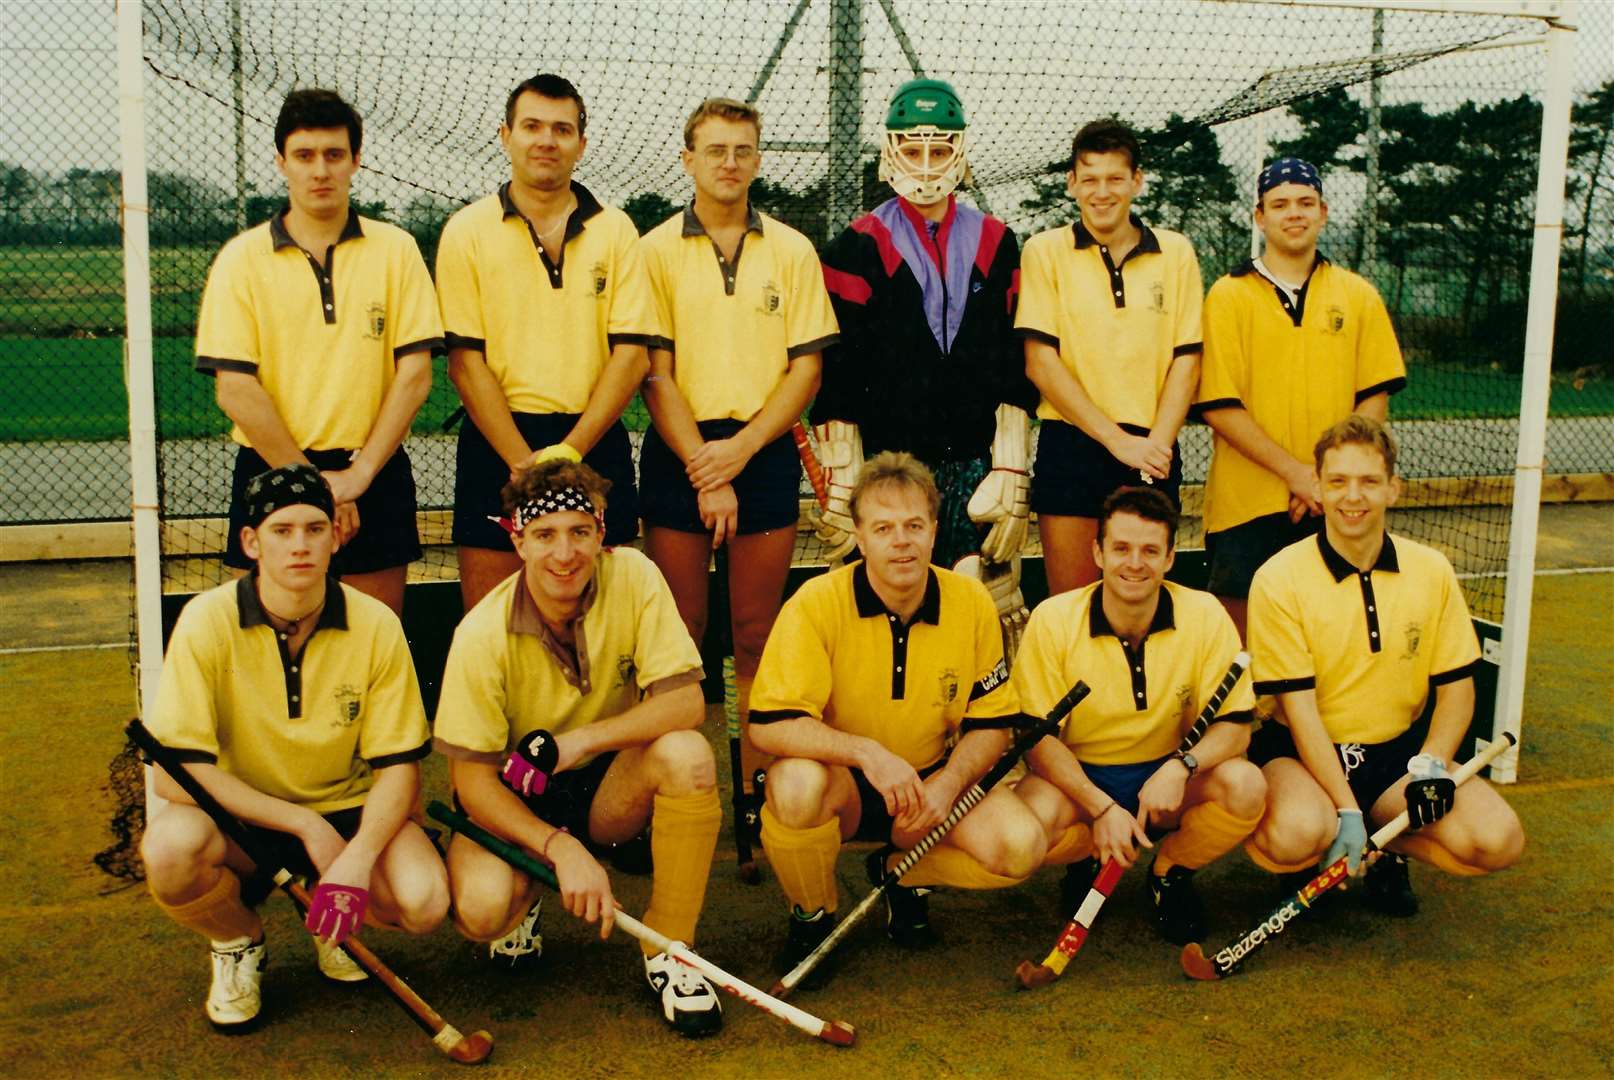 Tony Wyman, front centre, with the second team that went through the 1994/95 season unbeaten